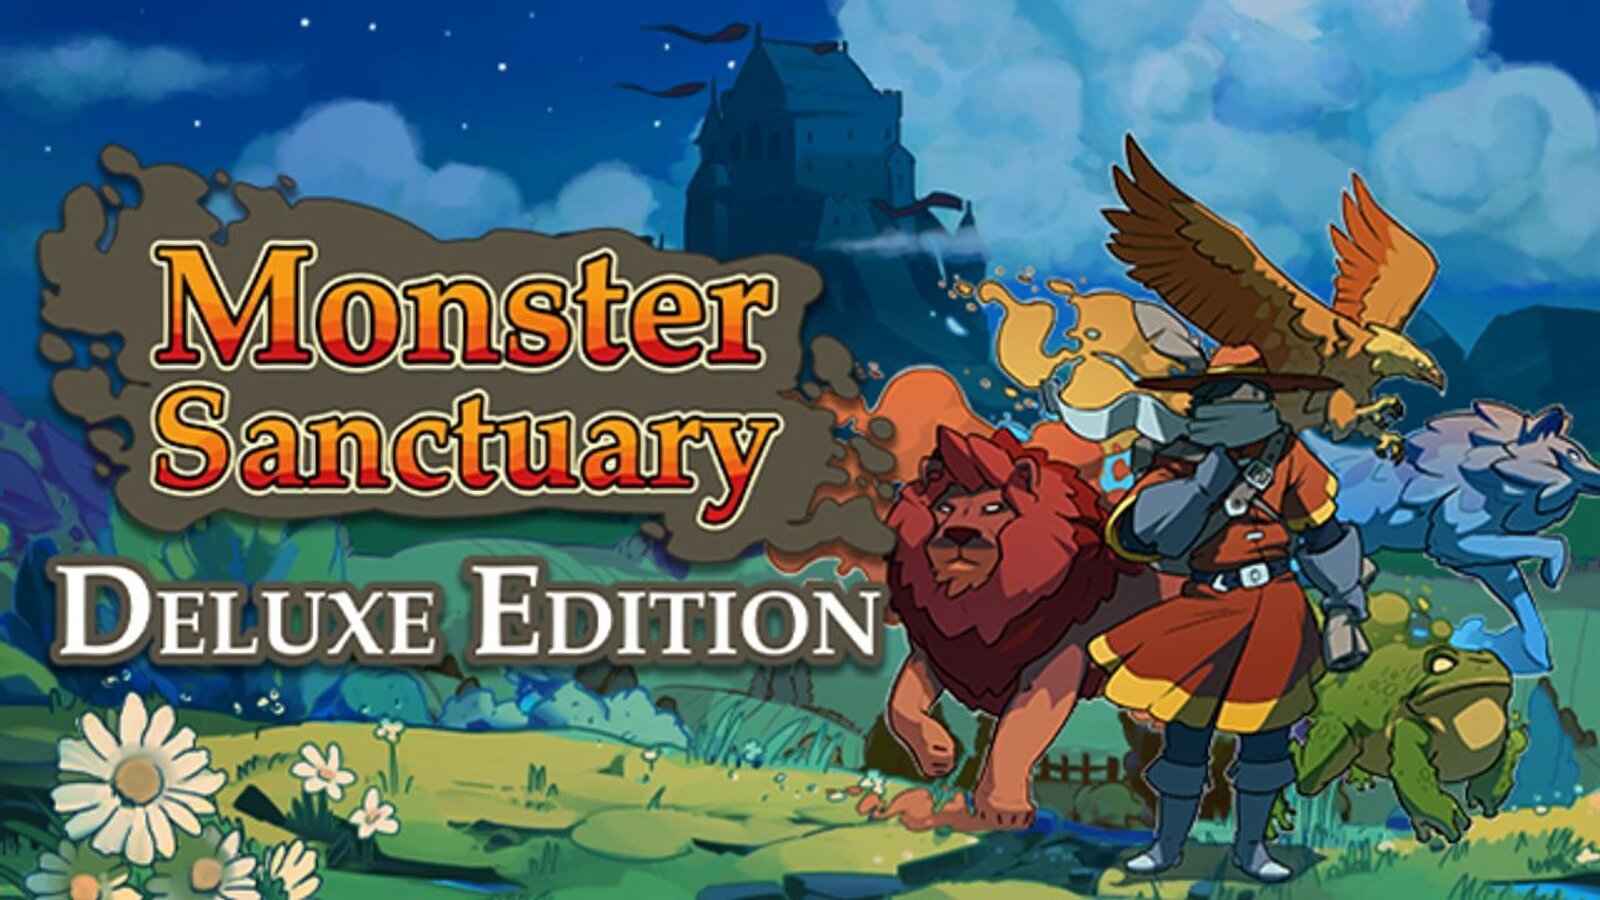 Monster Sanctuary - Deluxe Edition